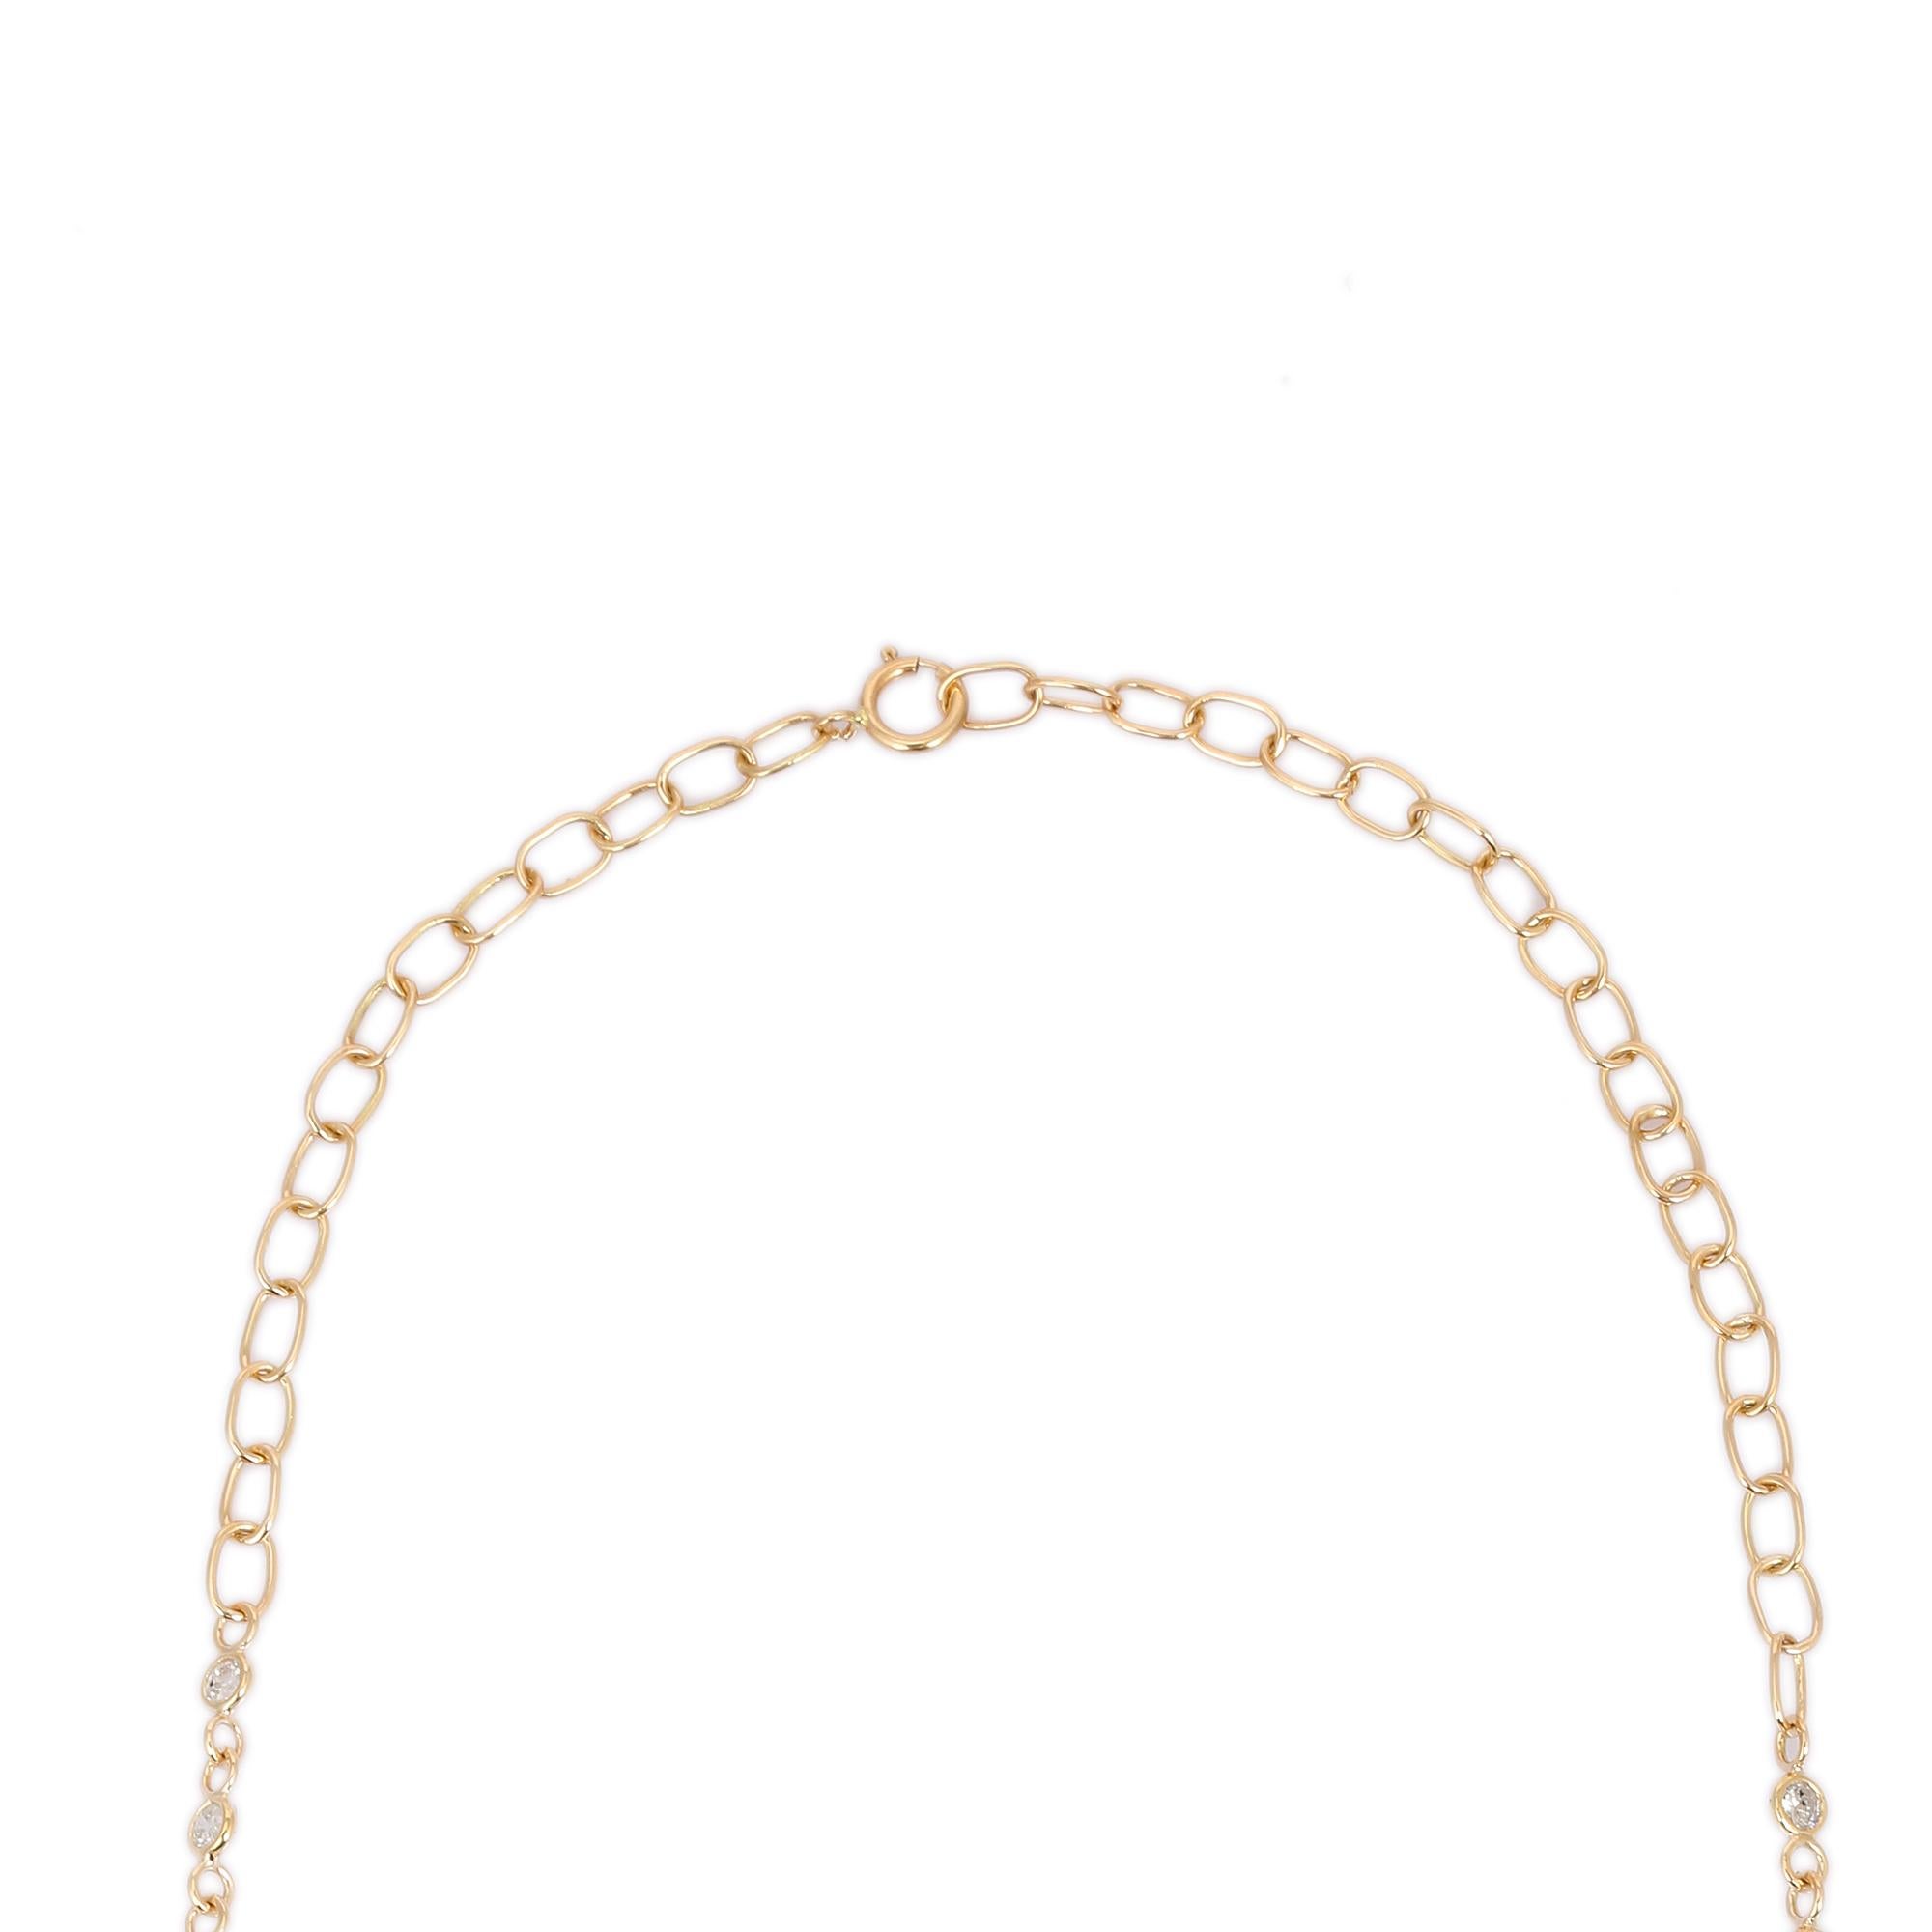 Fine Diamond Long Necklace 14k Solid Yellow Gold, Christmas Gift For Women 1